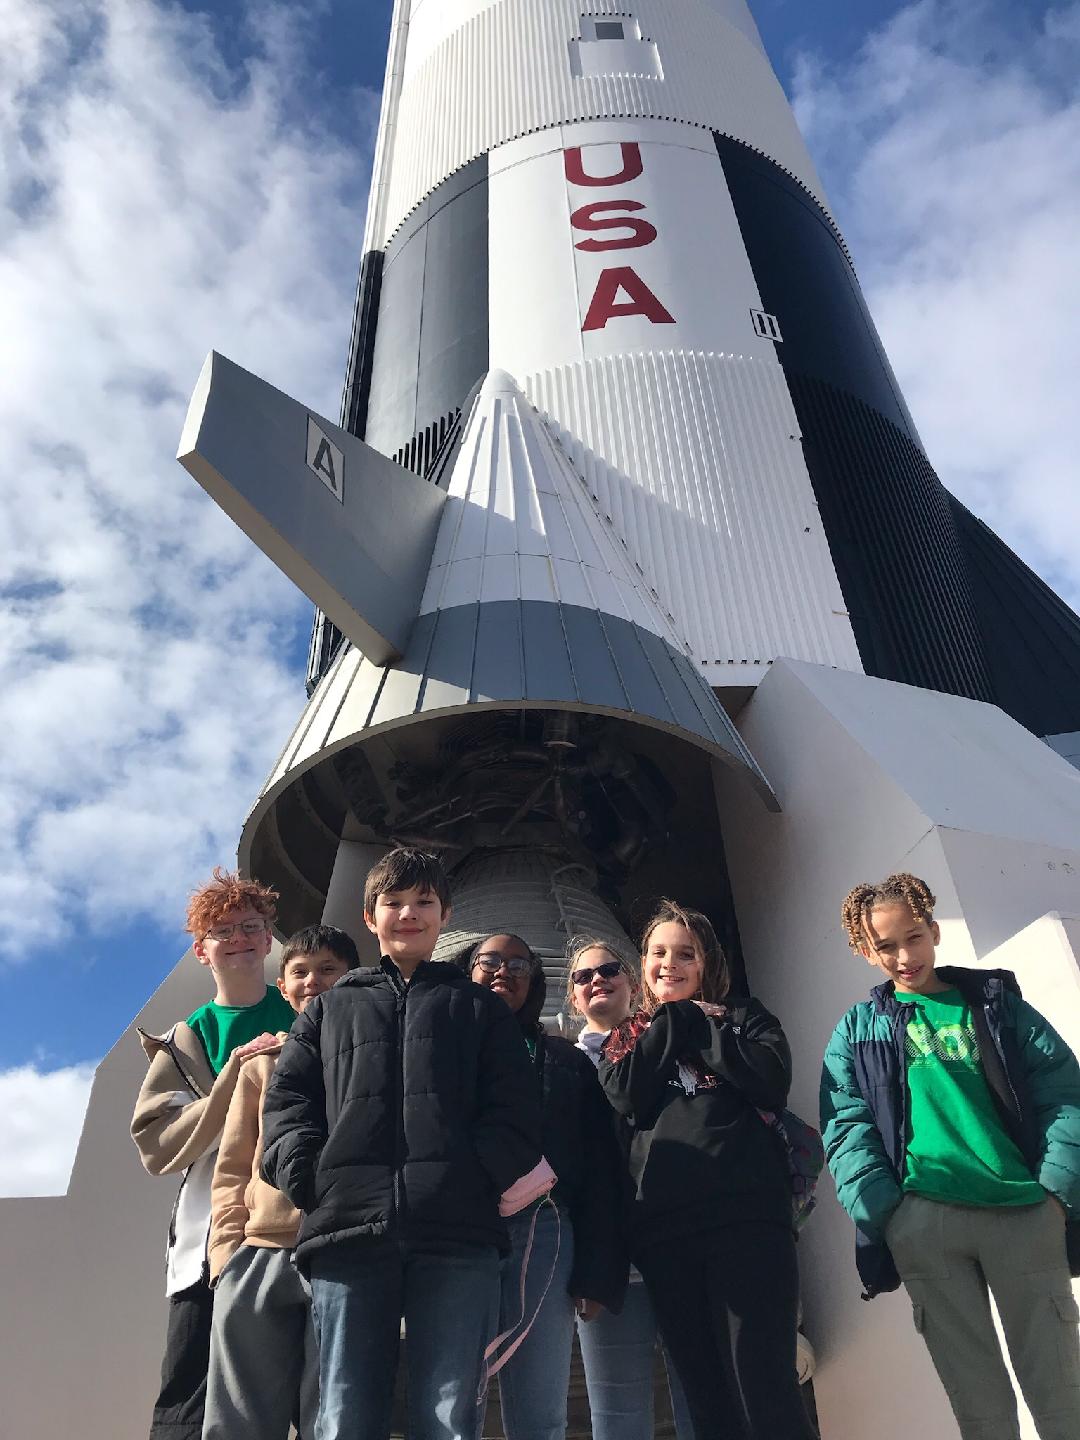 5th grade students from Cowan visited Huntsville Space and Rocket Center last week and they had an out of this world experience!